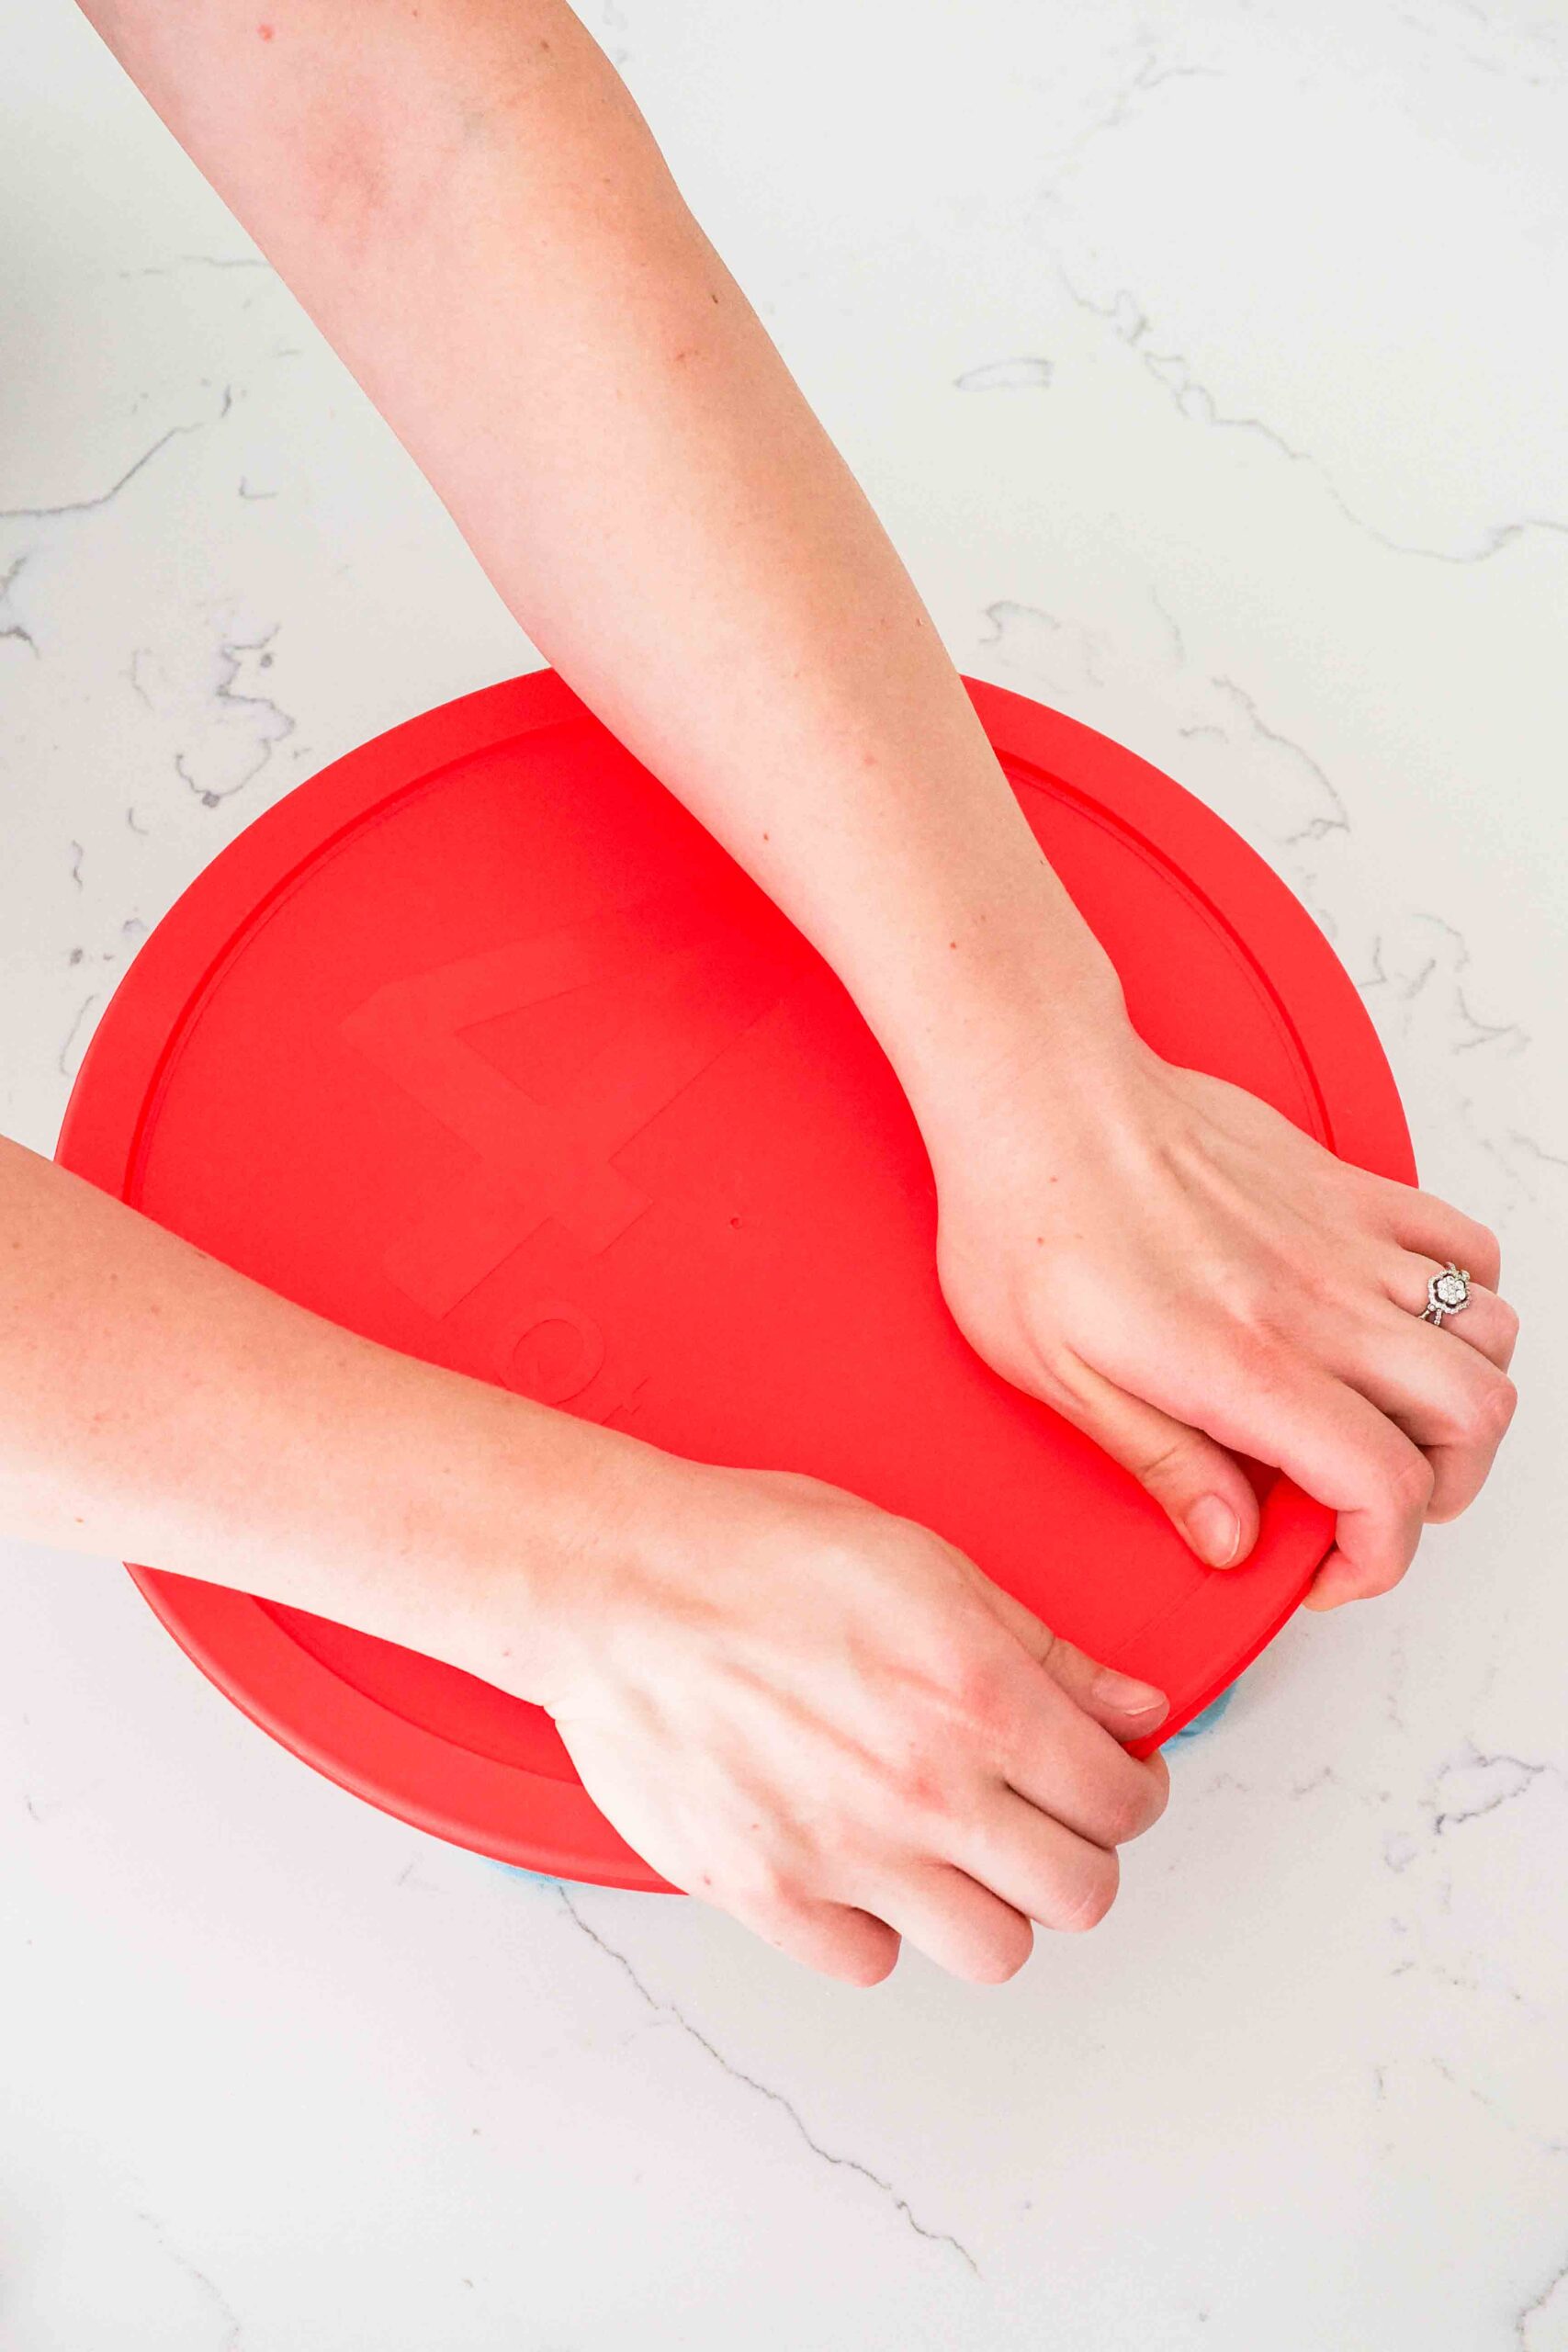 Two hands cover a glass bowl with a red lid.